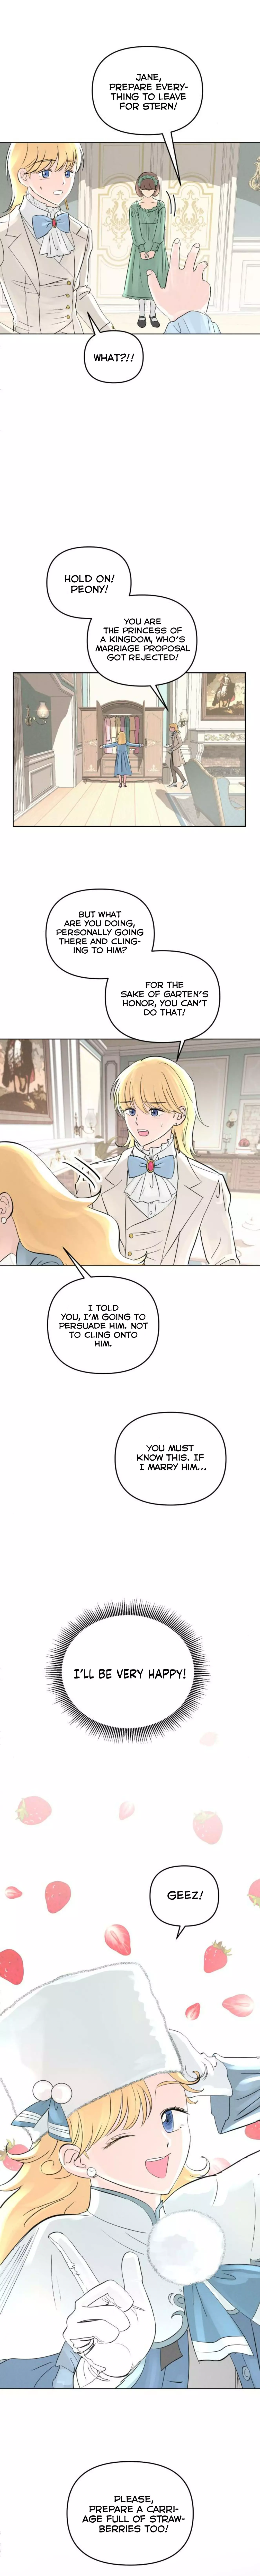 I Picked Up The Second Male Lead After The Ending - 2 page 16